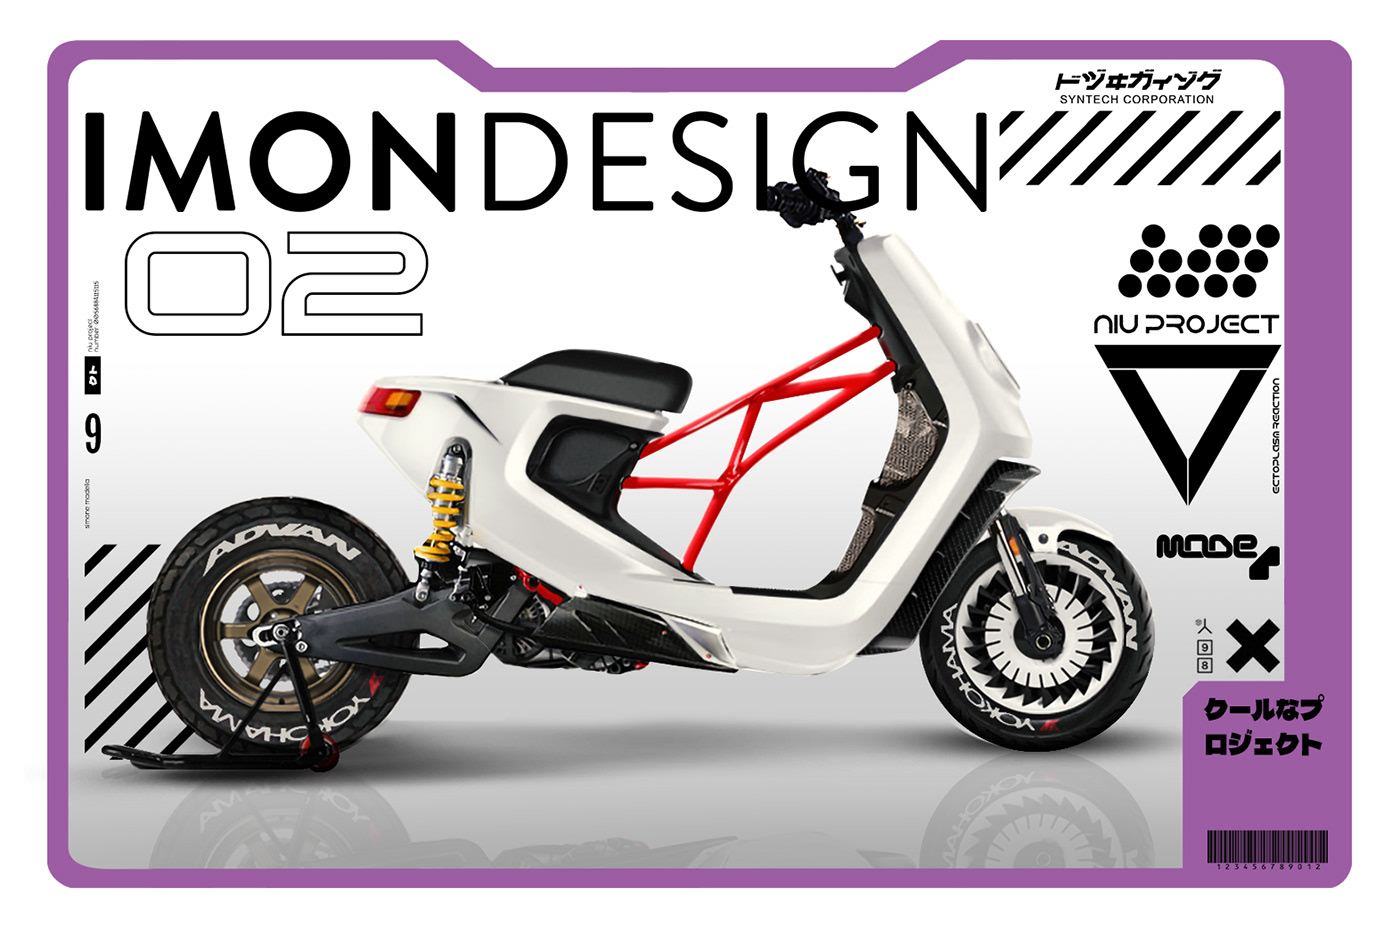 concept bike idsketch IMON DESIGN niu scooter custom scooter design scooter tuning SIMONE MADELLA  sport scooter Scooter